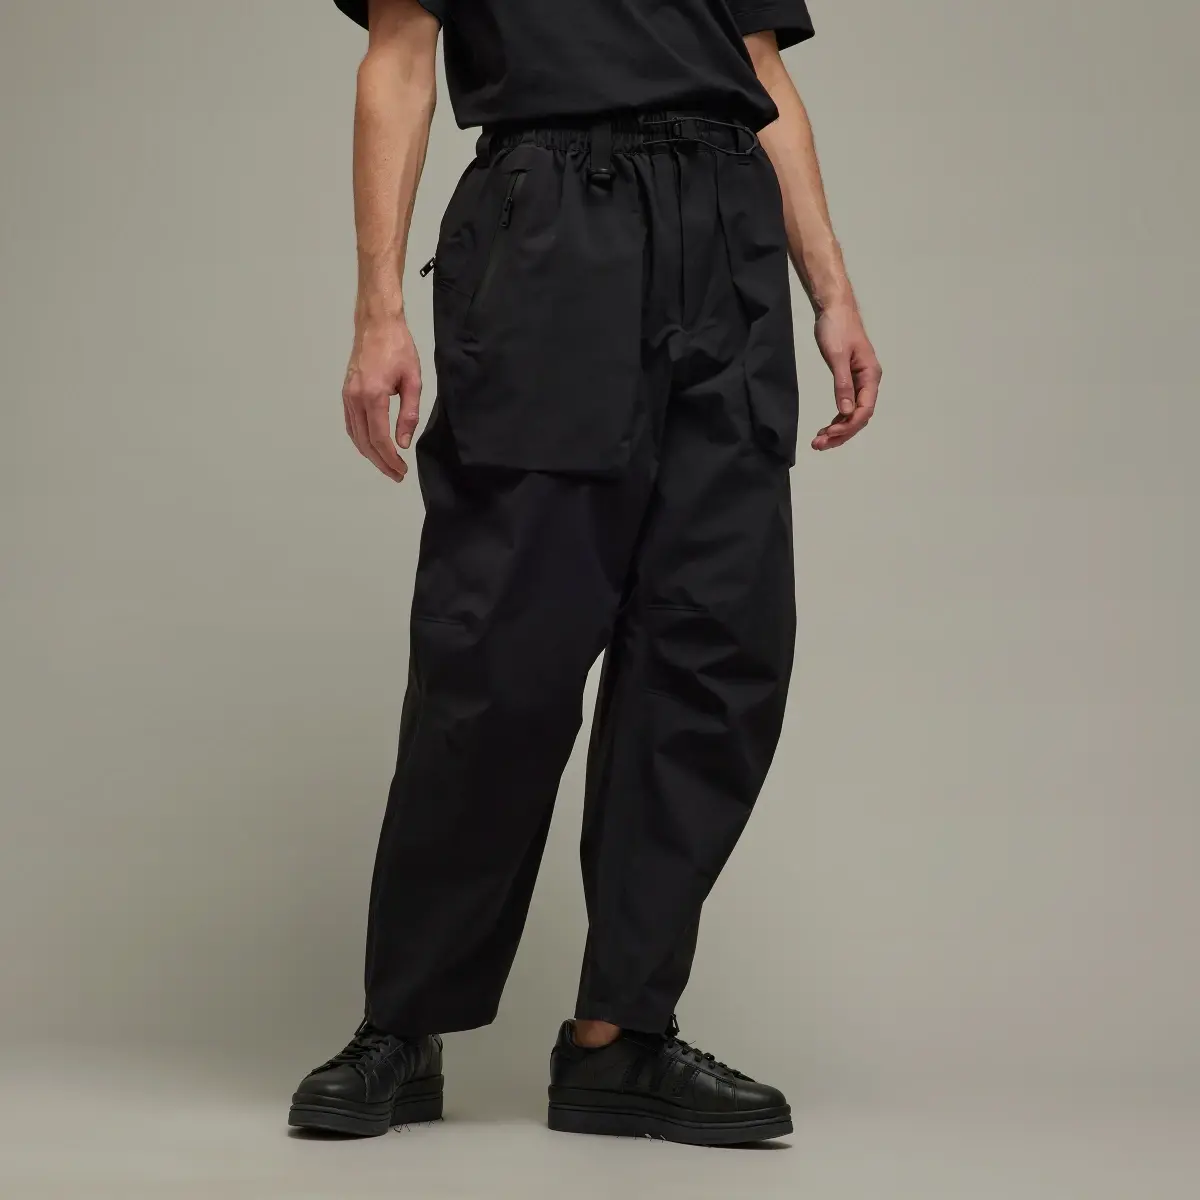 Adidas Y-3 Gore Tex Hard Shell Tracksuit Bottoms. 1